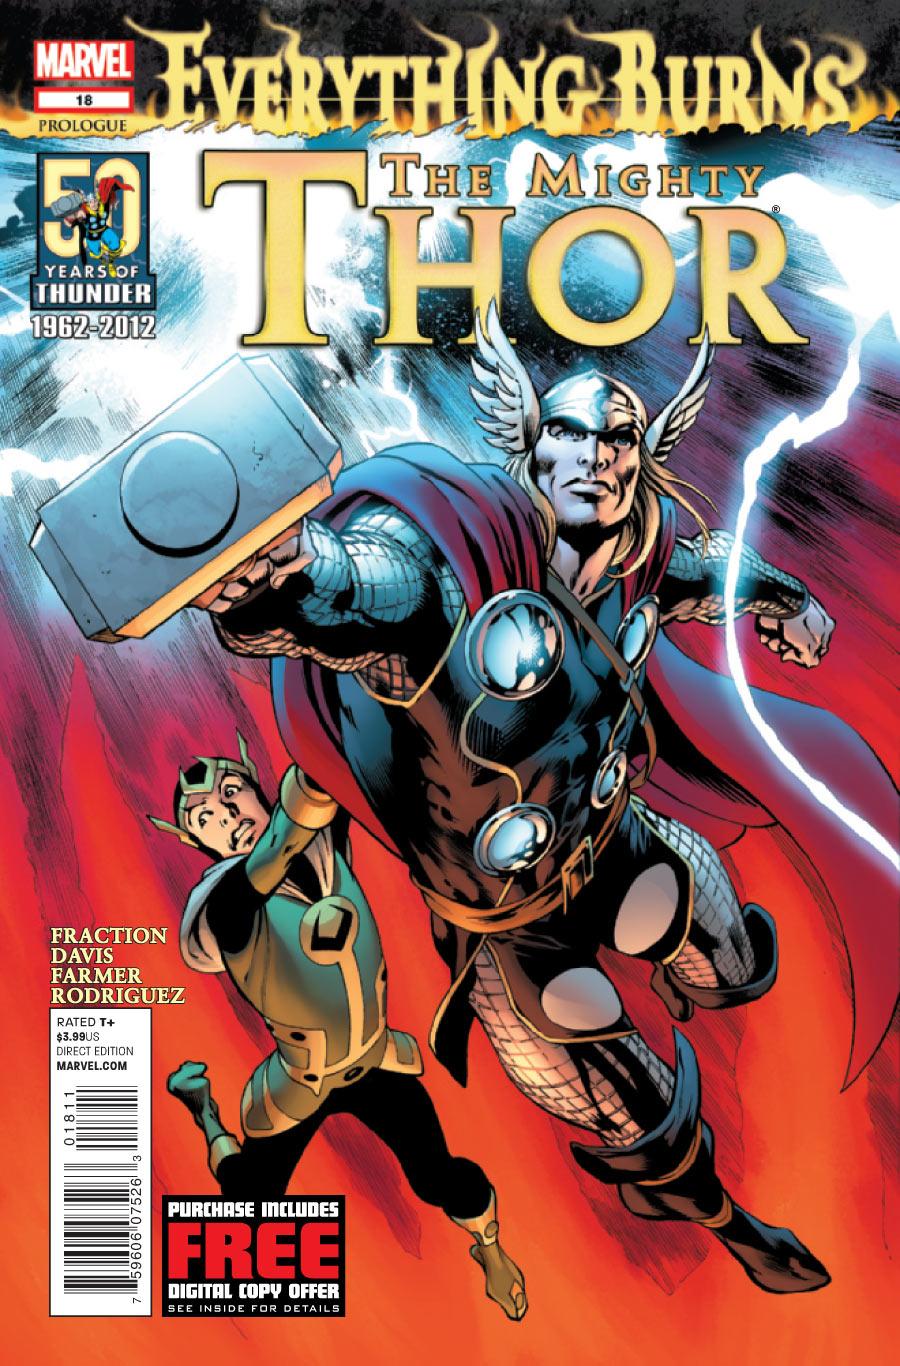 The Mighty Thor Vol. 1 #18